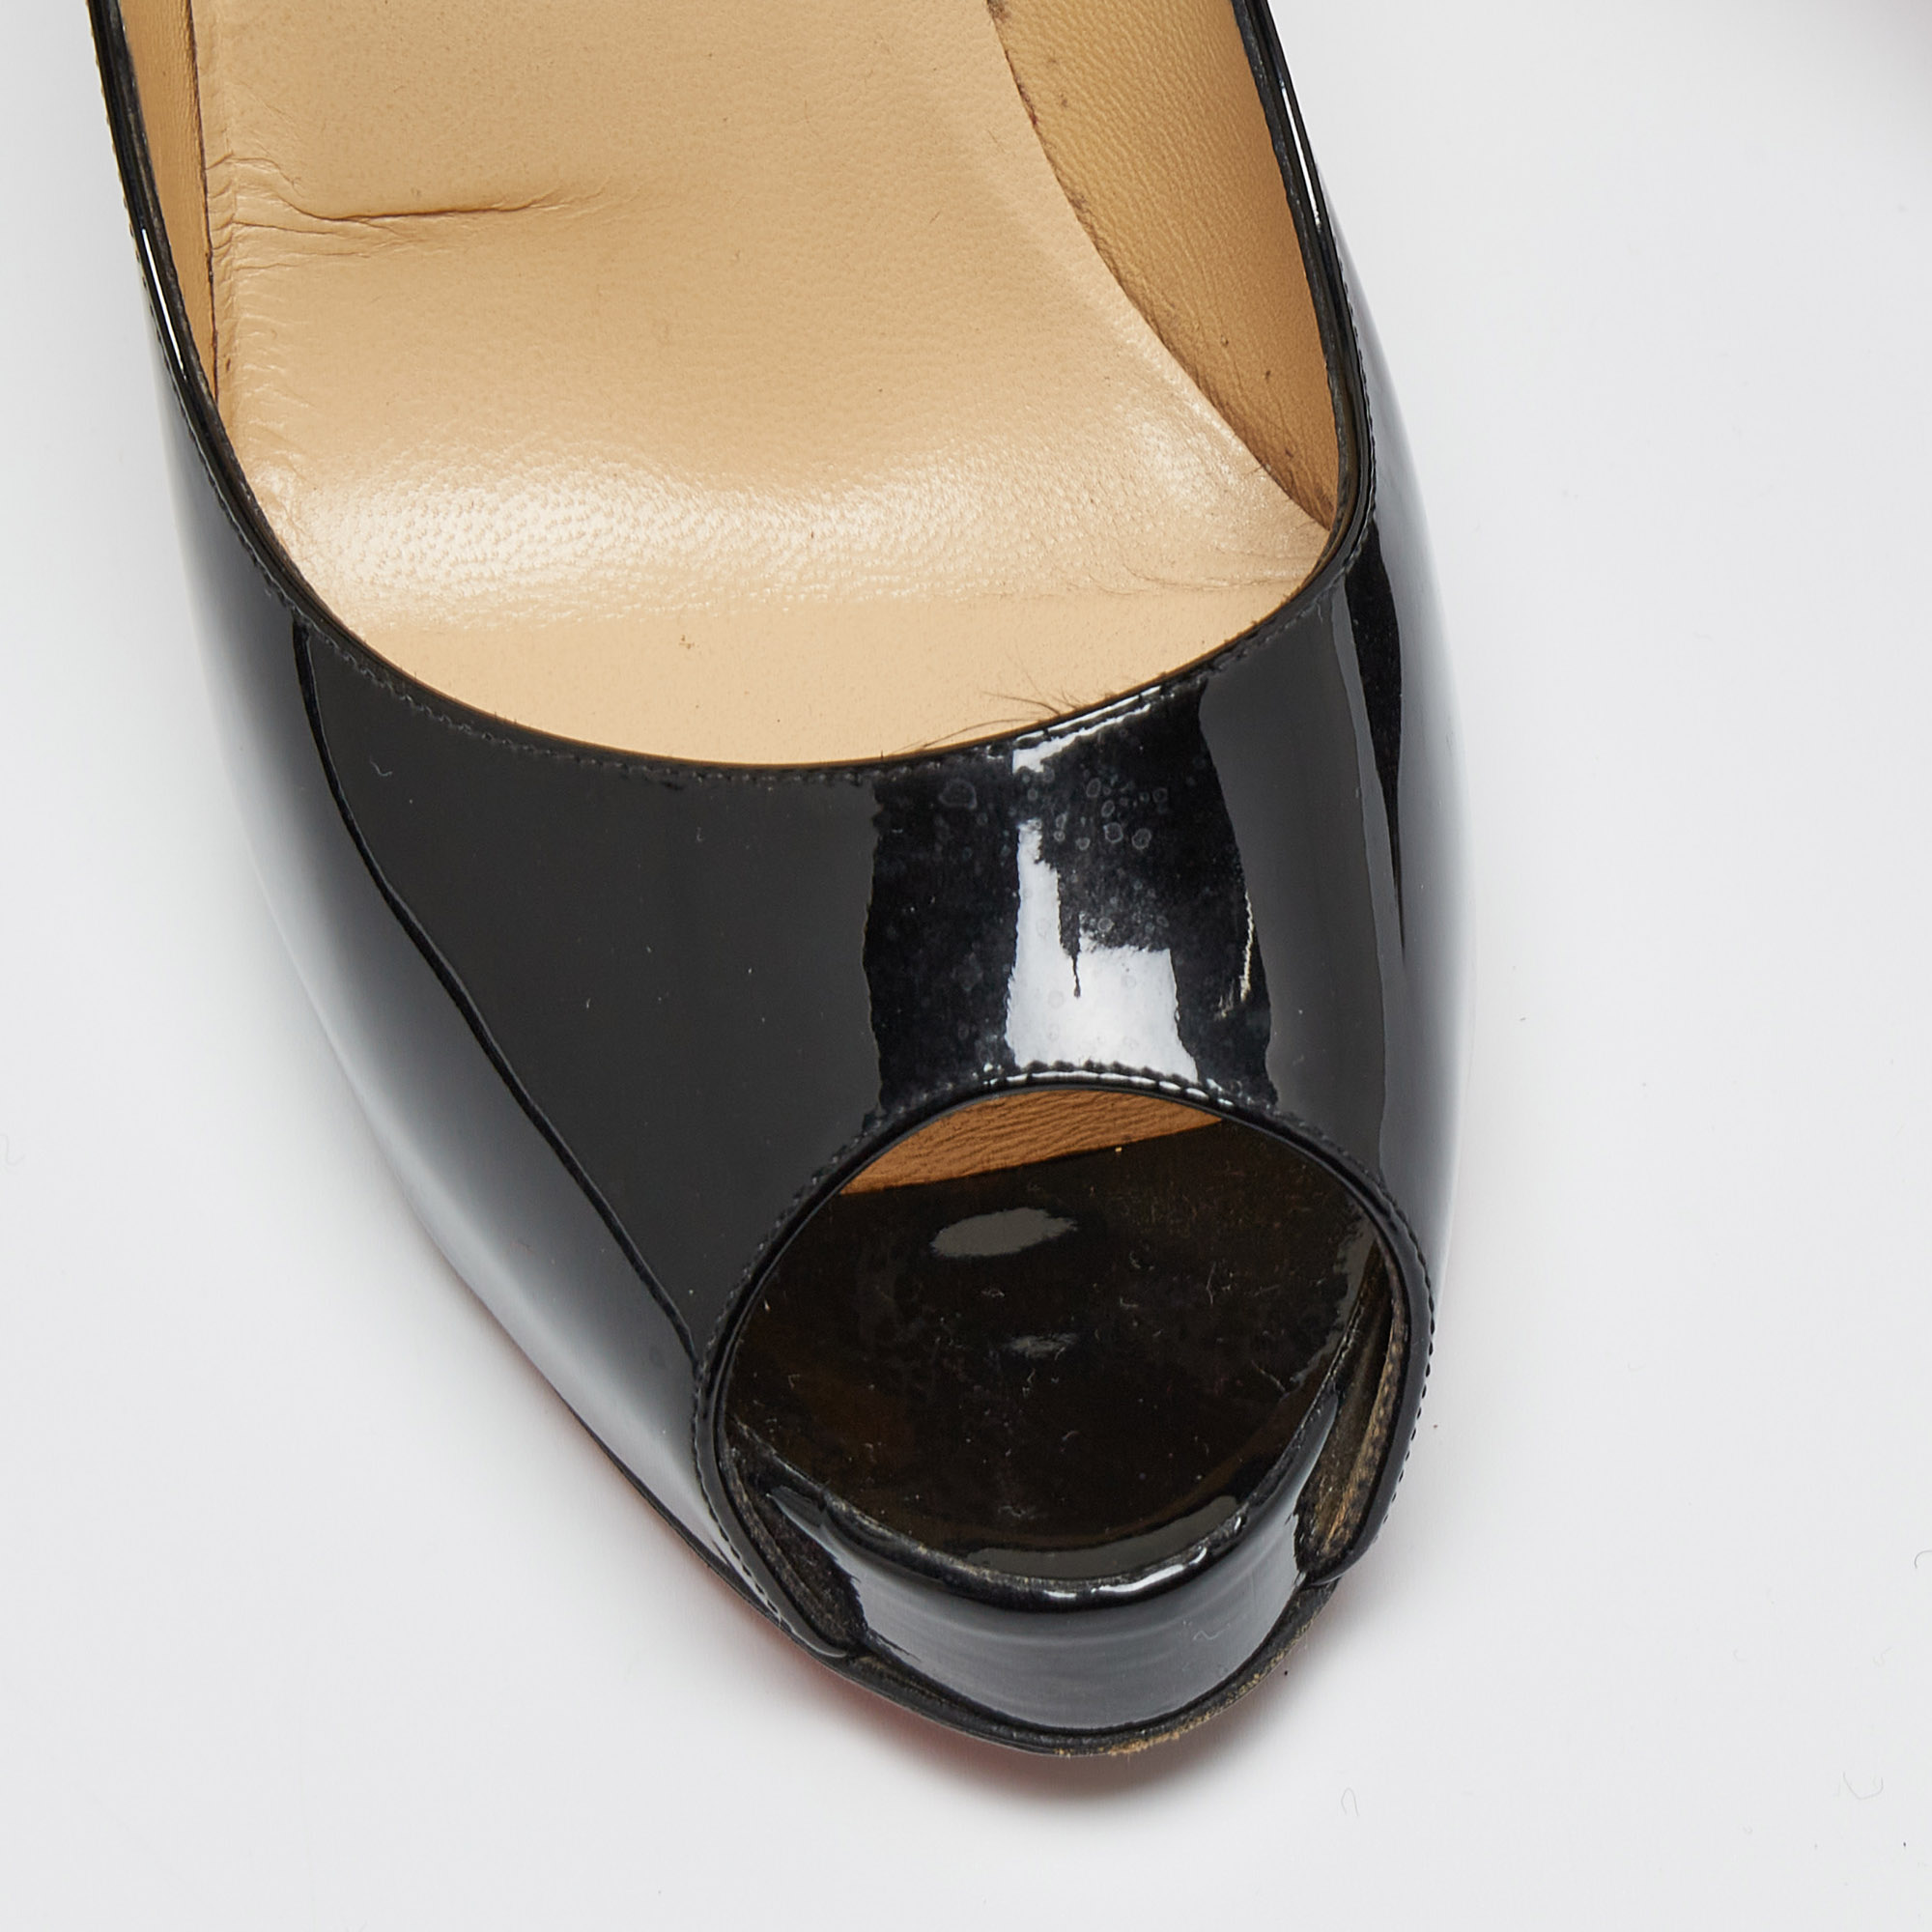 Christian Louboutin Black Patent Leather New Prive Pumps Size 38.5